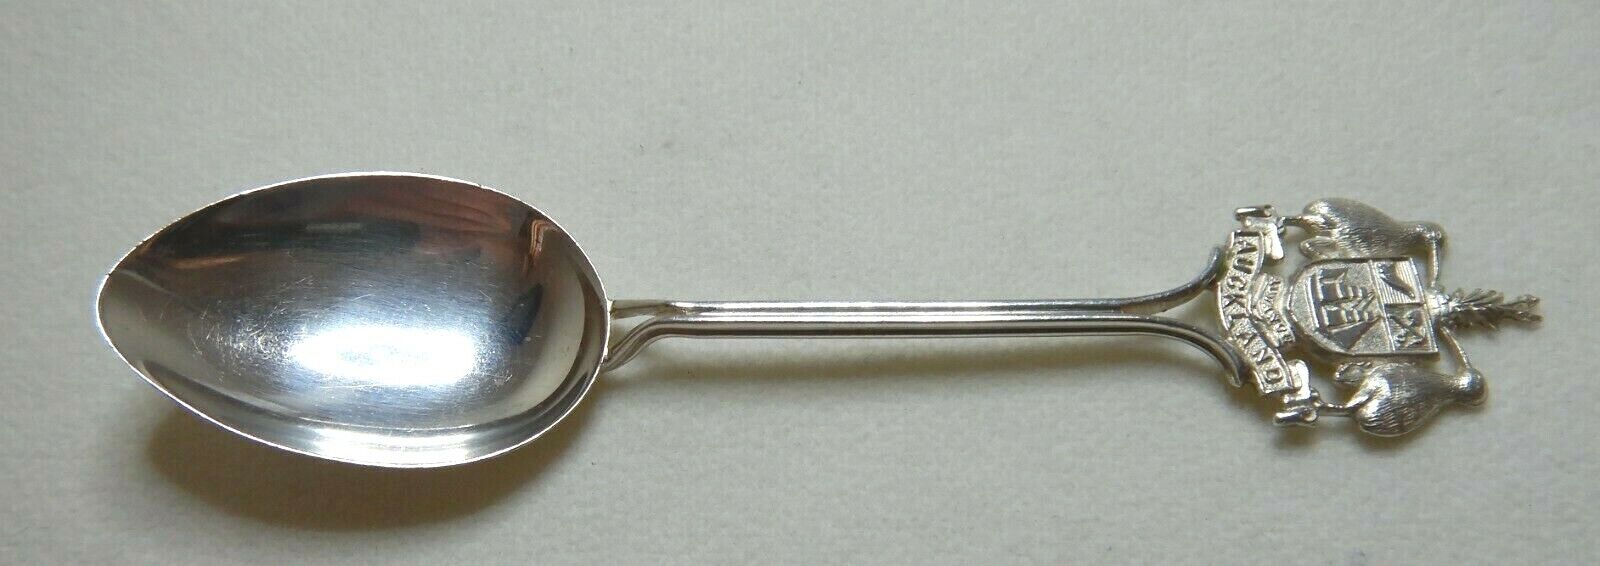 ANTIQUE SOUVENIR SPOON - AUCKLAND NEW ZEALAND - BRITISH STERLING SILVER    SN255